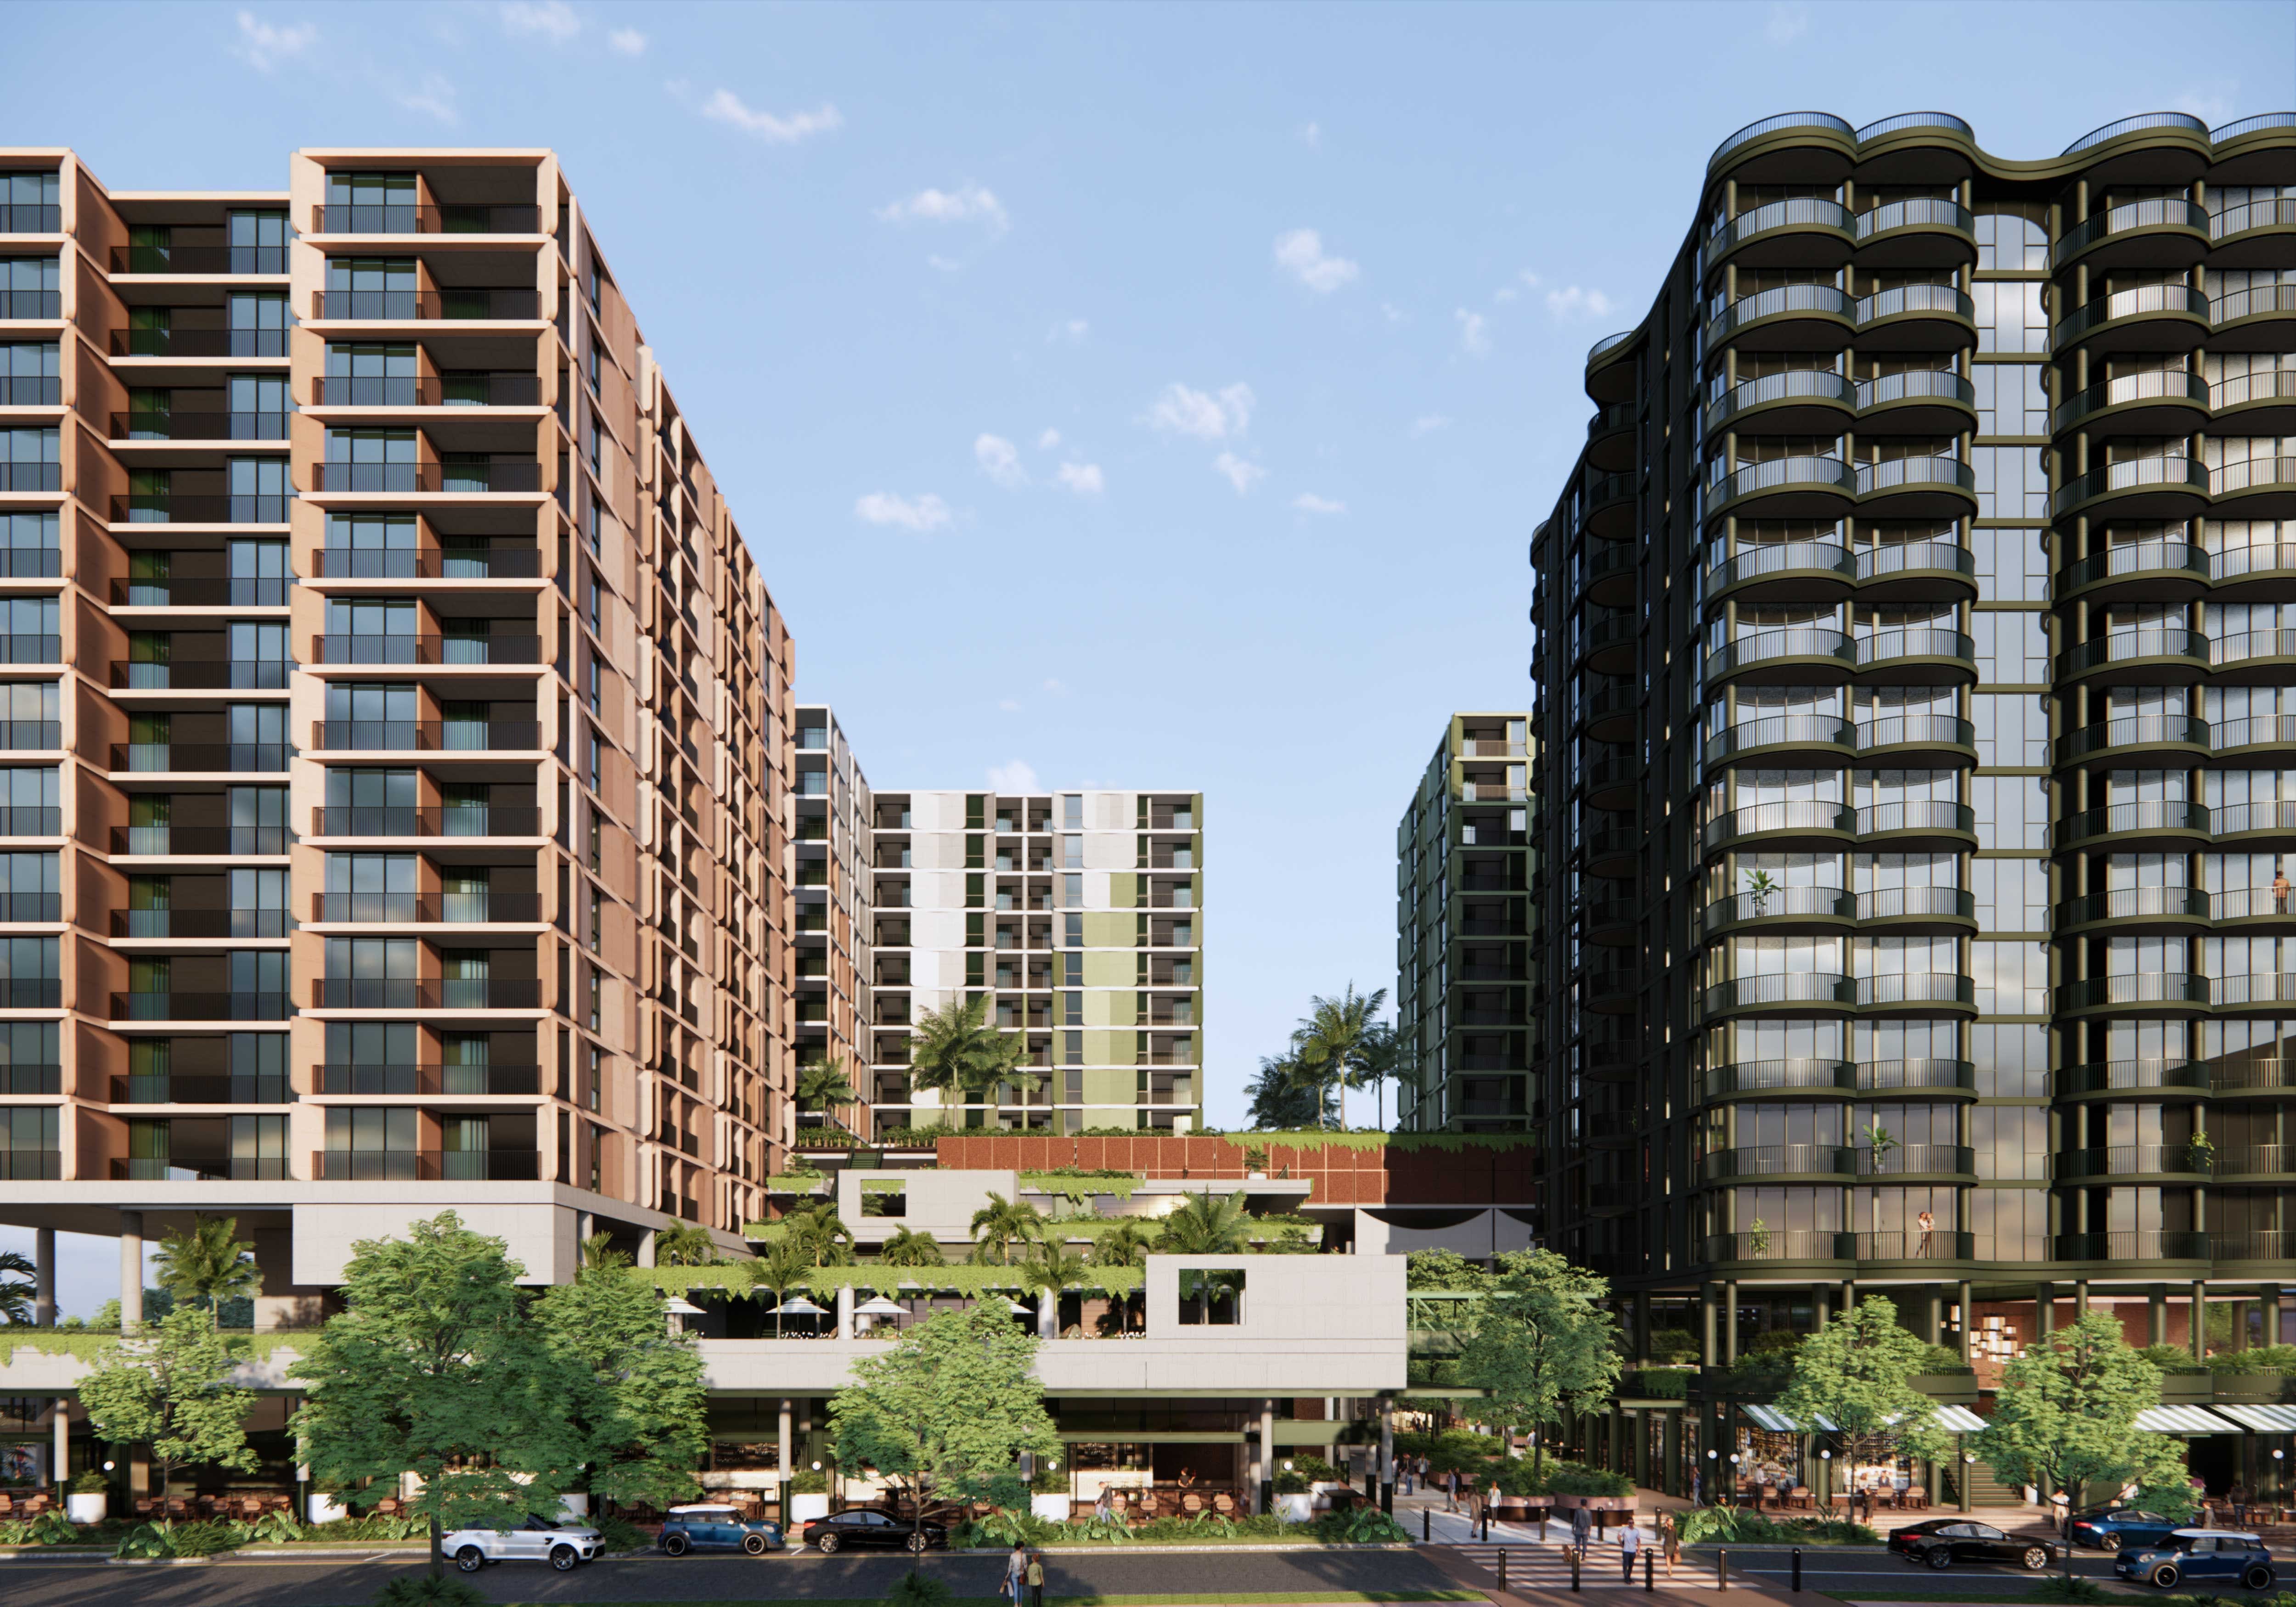 Vicinity gets the green light to proceed with $750m Buranda Village redevelopment in Brisbane